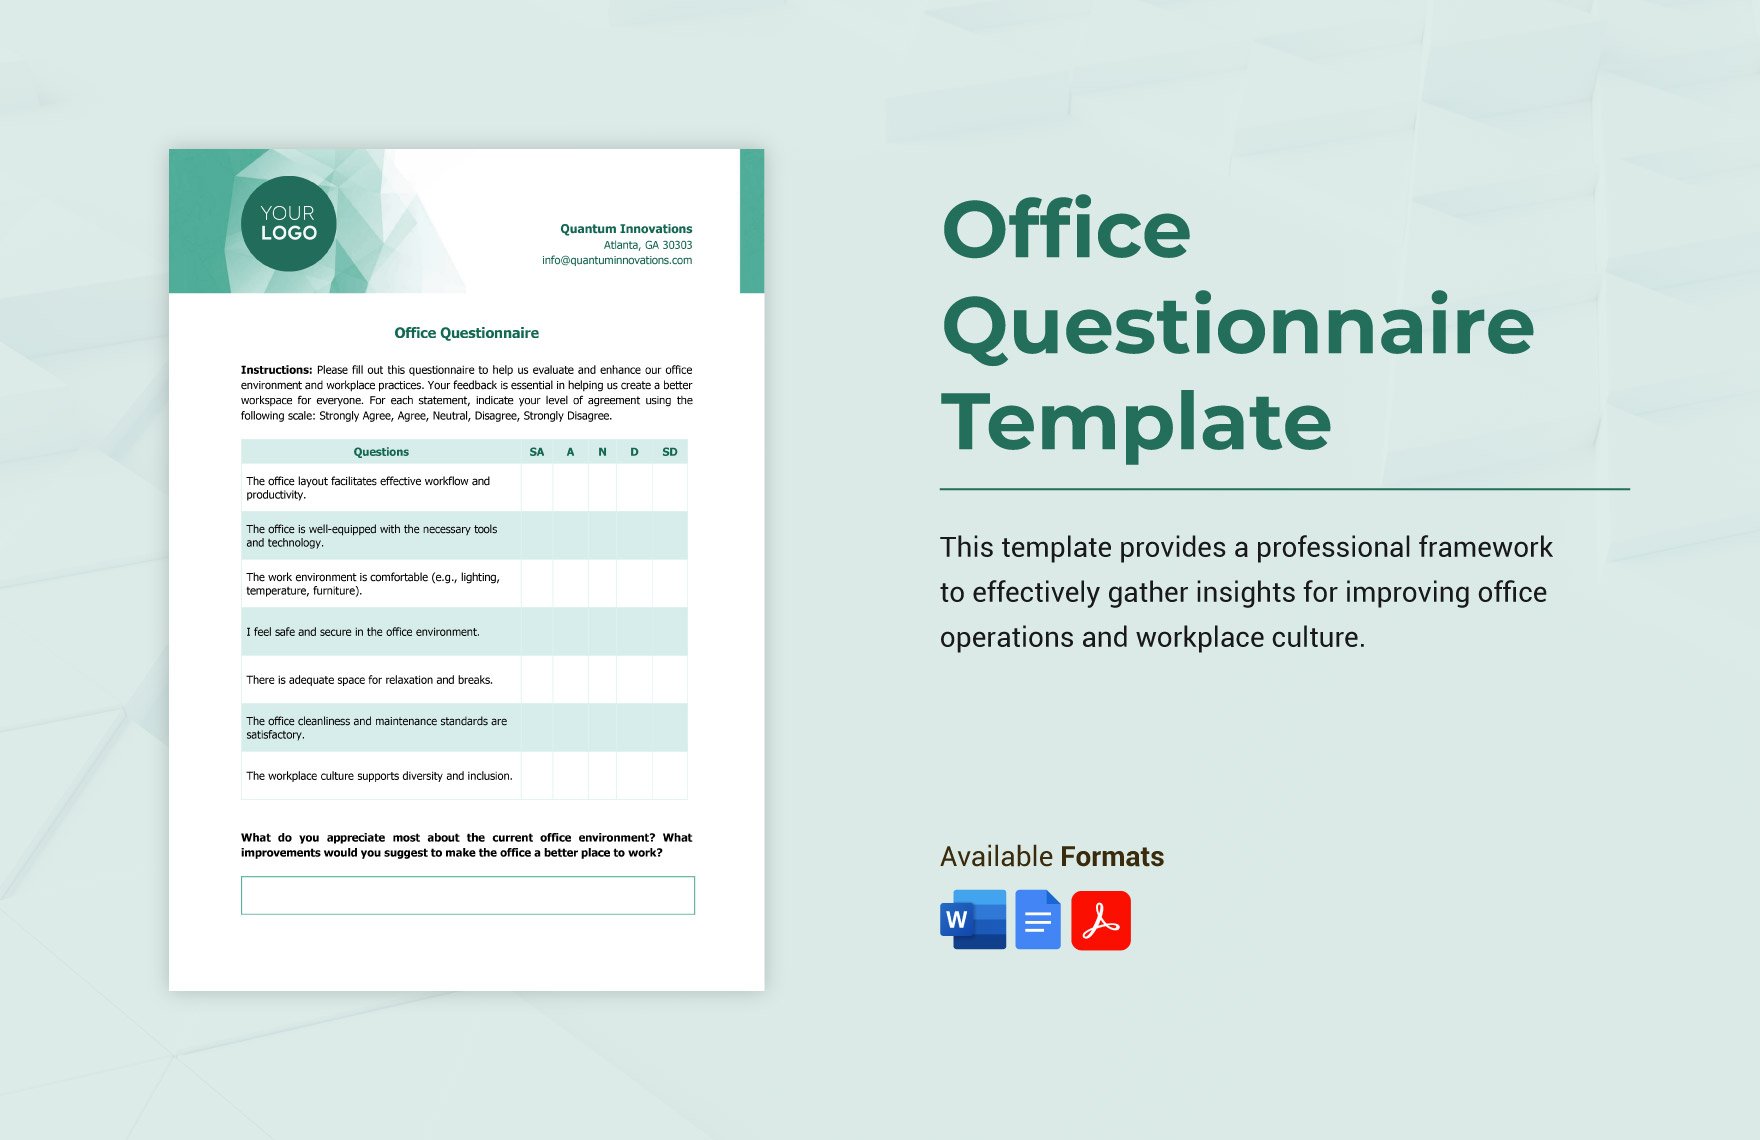 Office Questionnaire Template